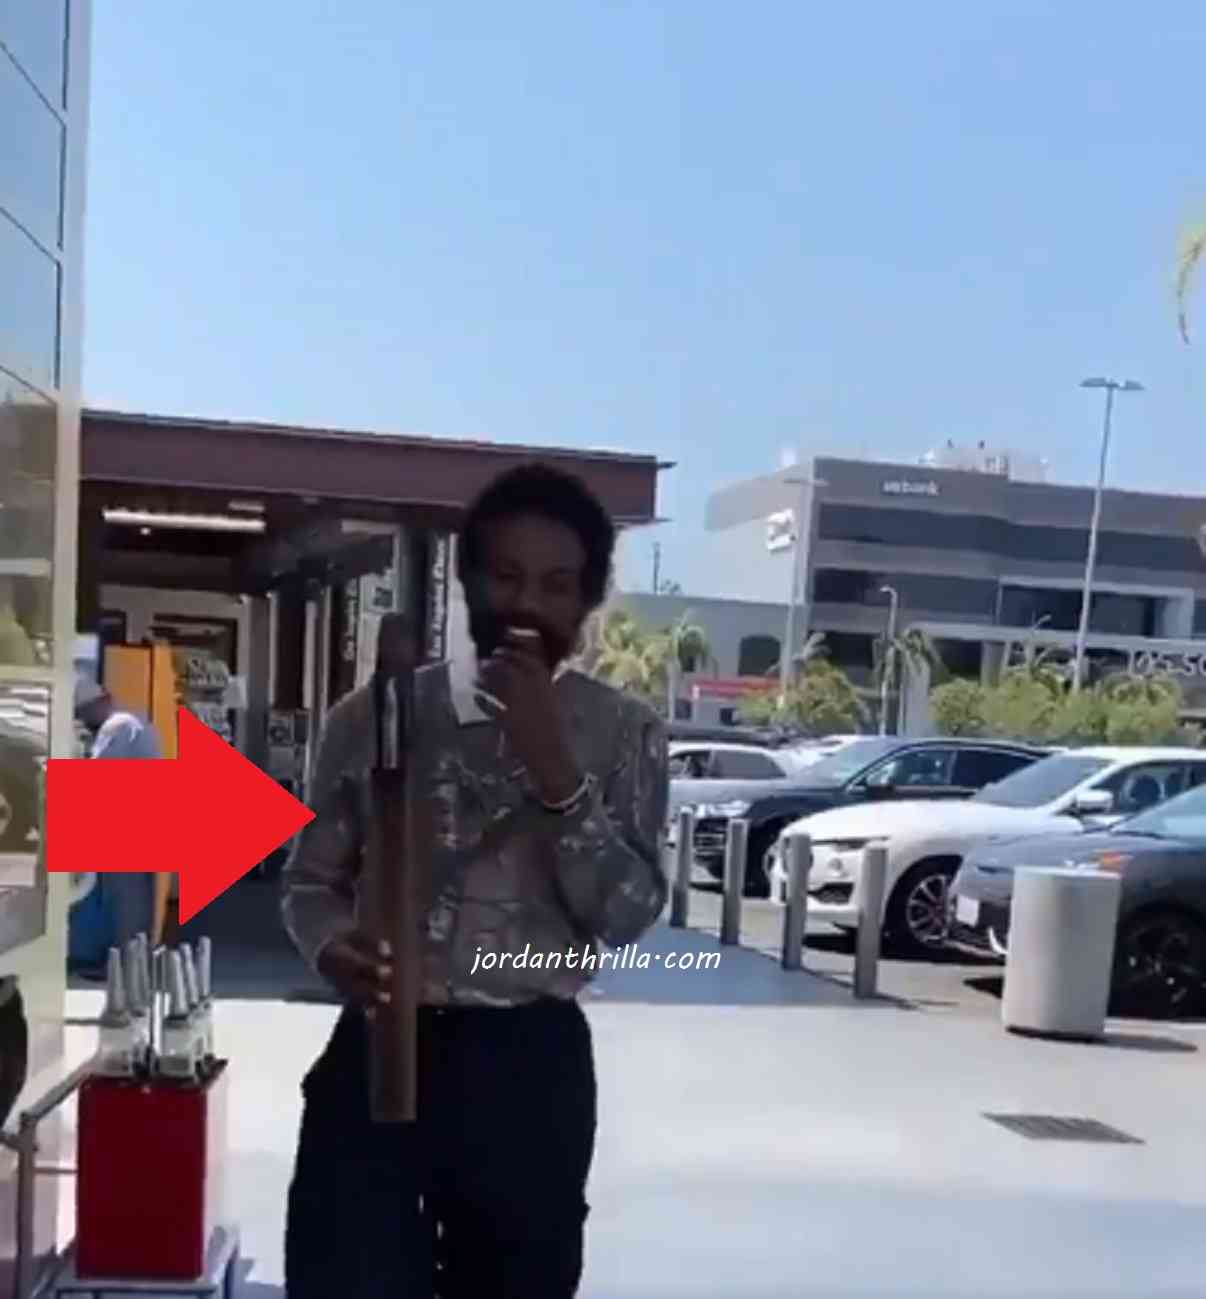 Andre 3000 Spotted Playing Flute Outside Gas Station in Hunting Gear